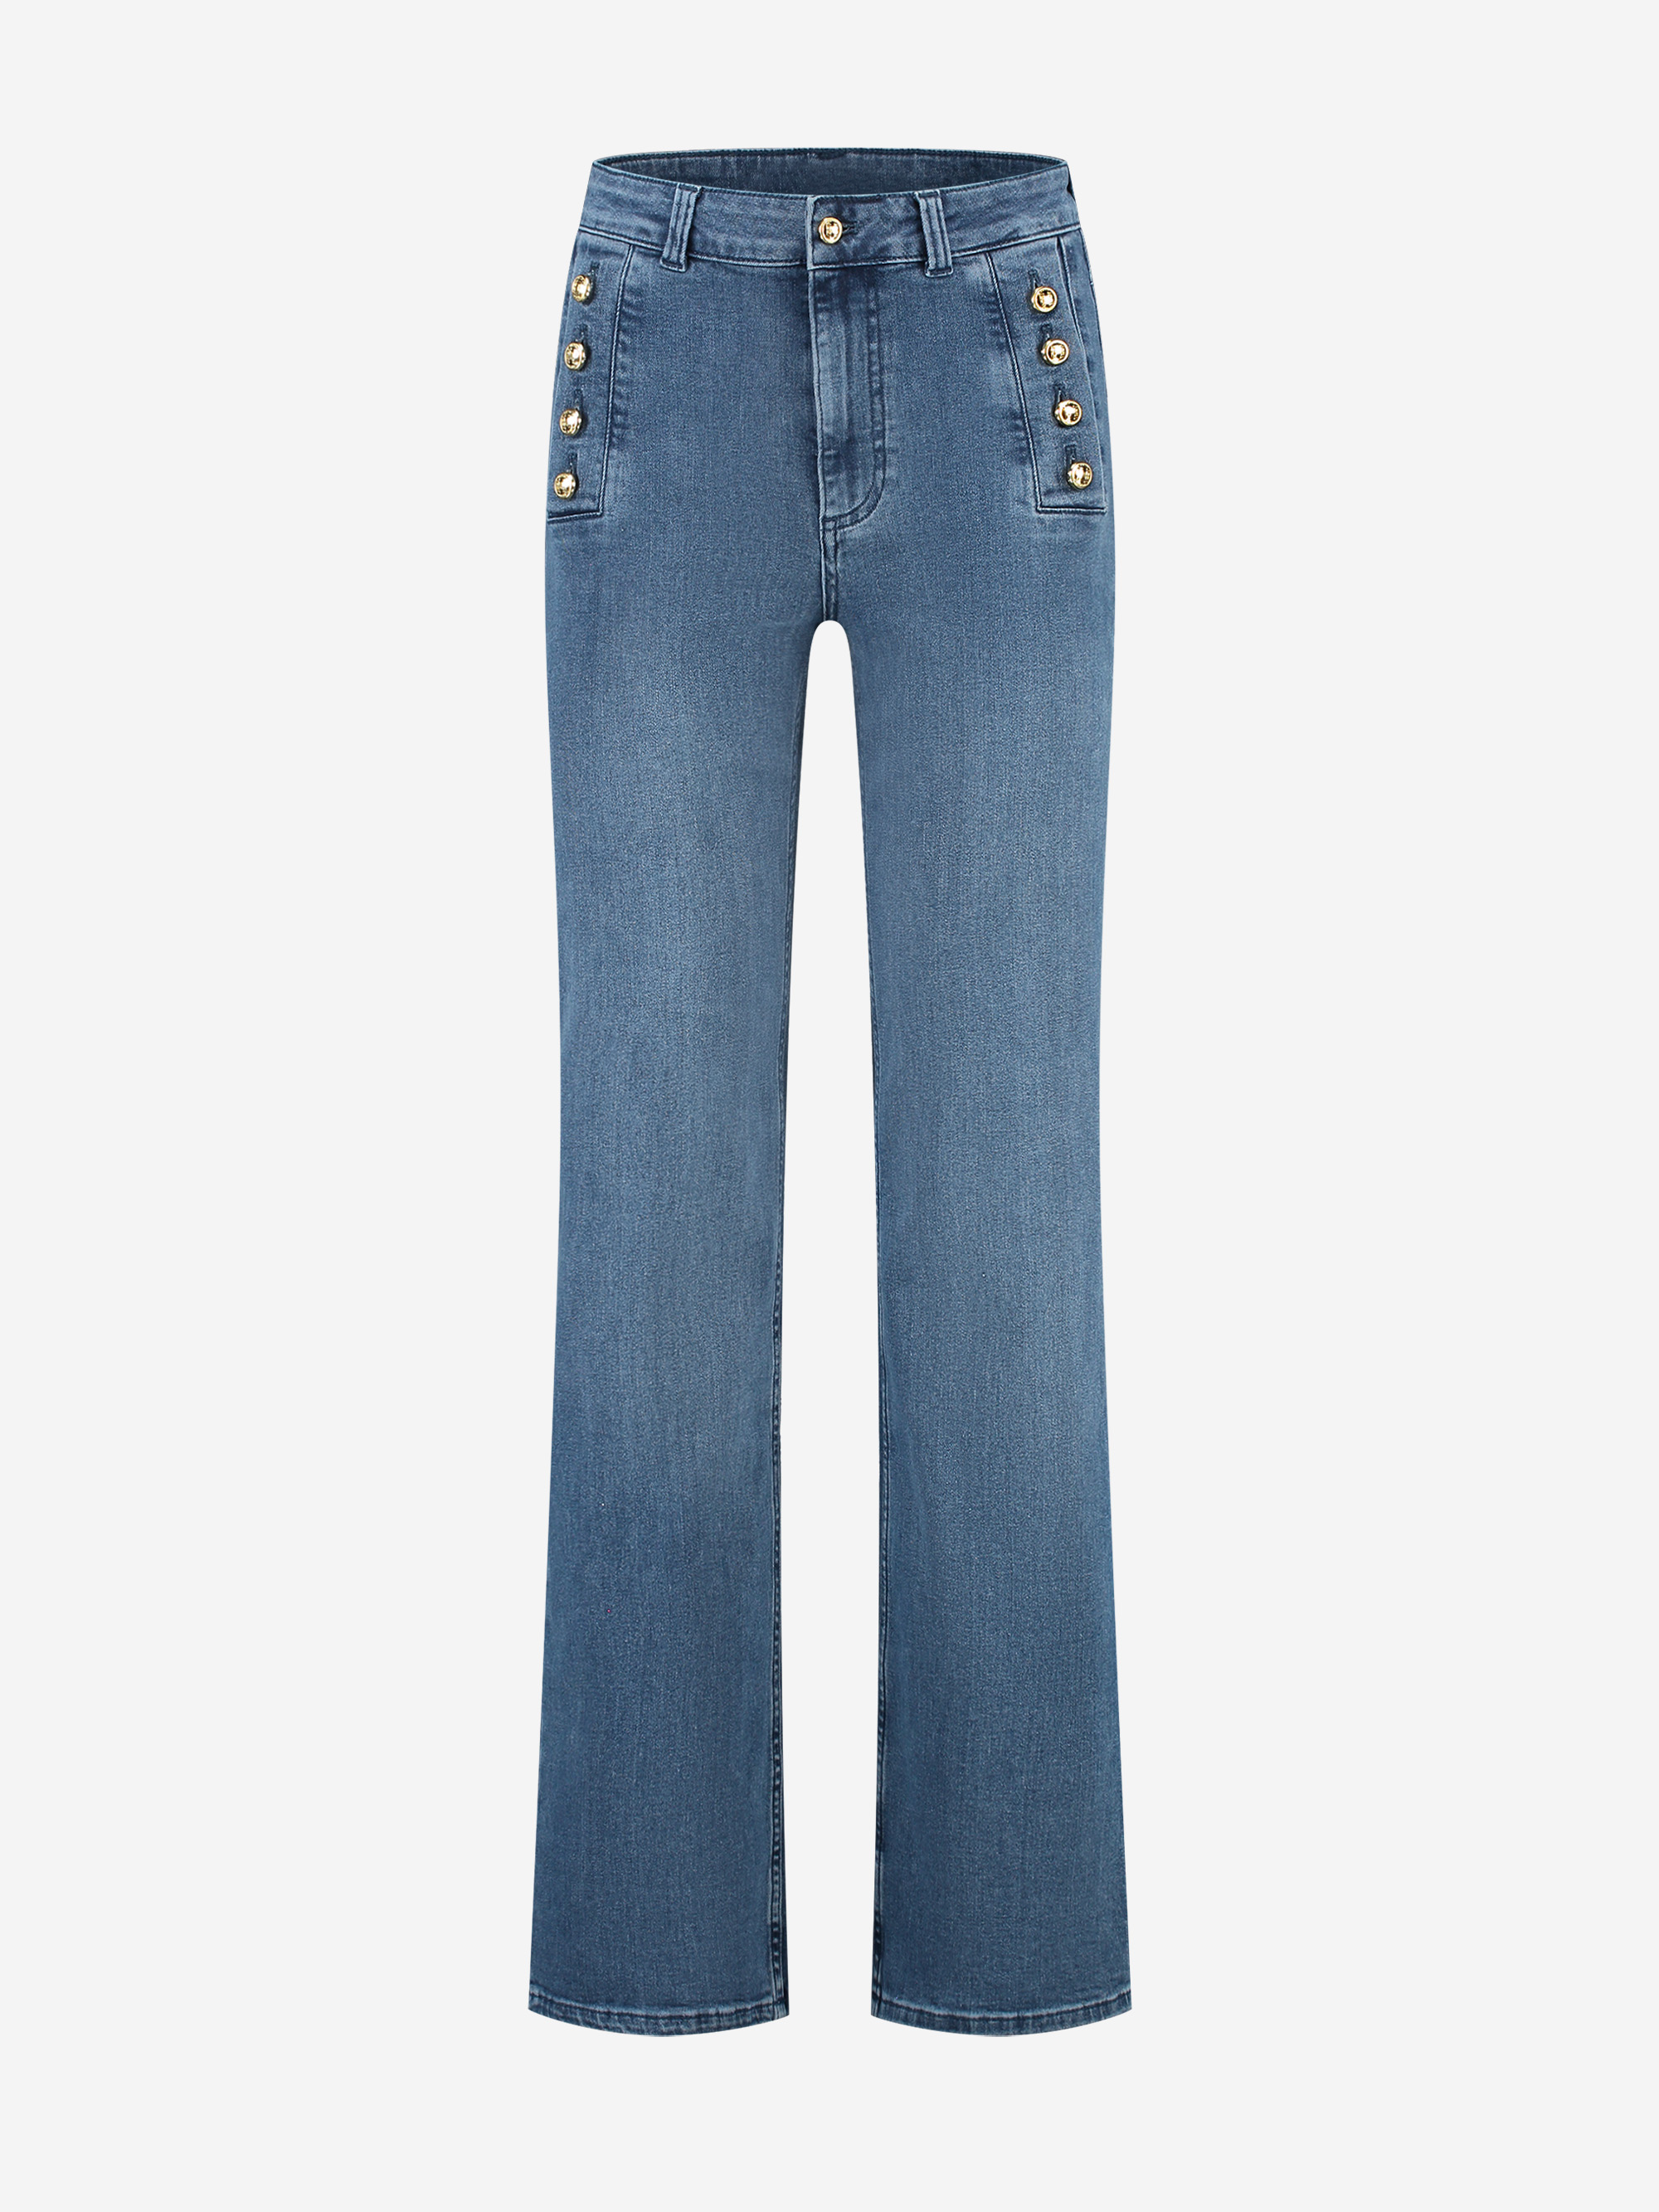 High rise jeans with buttons